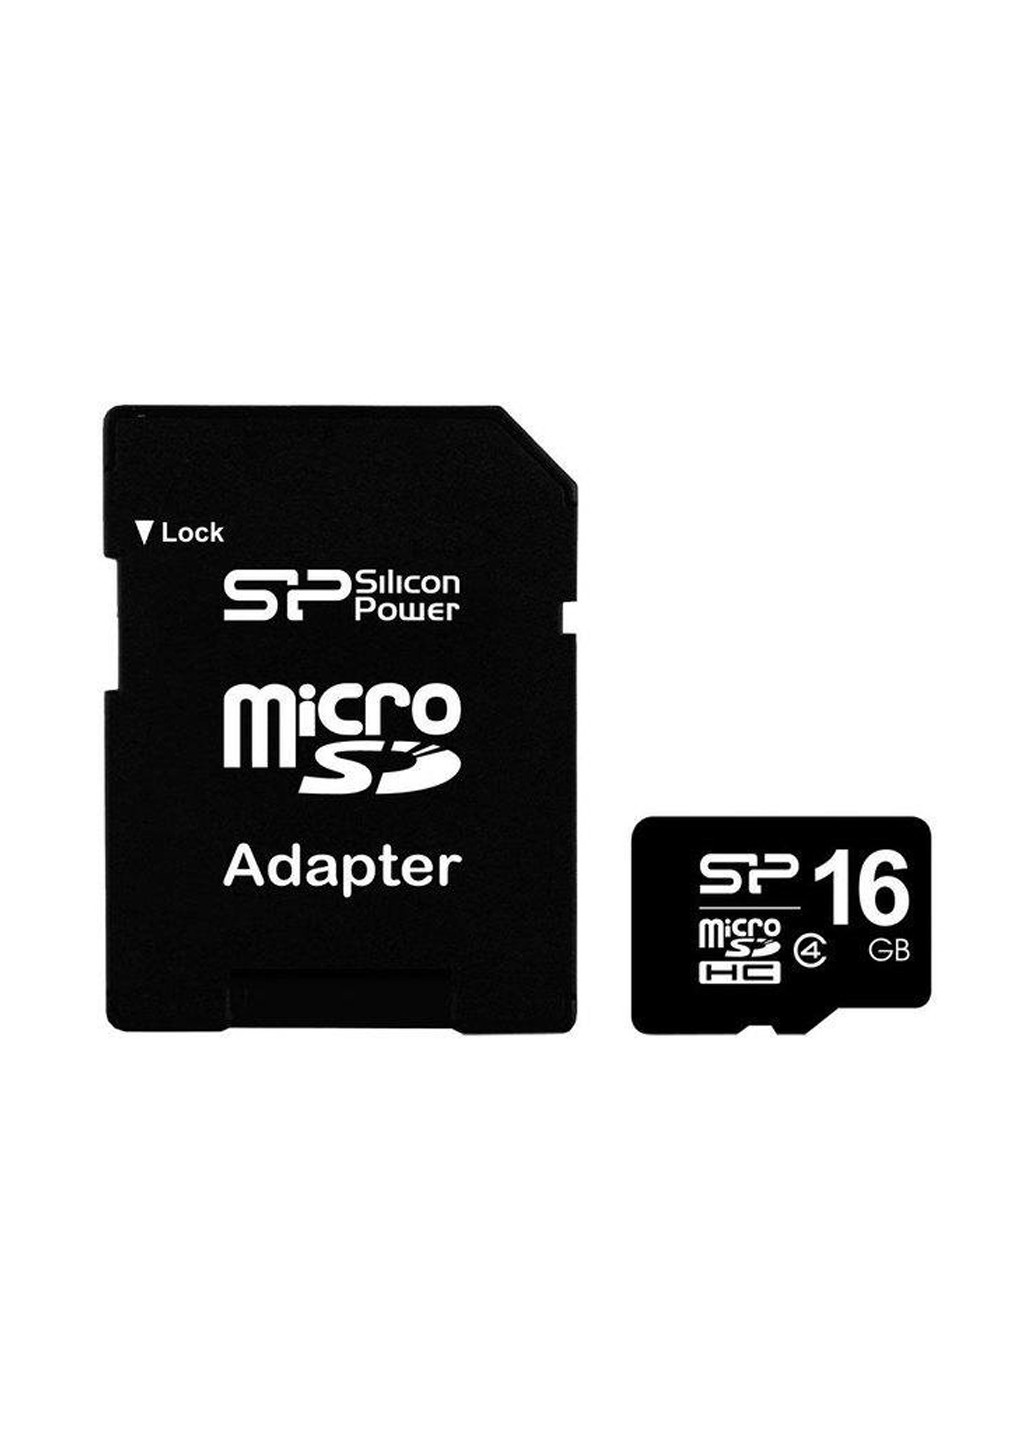 Карта памяти microSDHC 16GB C4 + SD-adapter (SP016GBSTH004V10SP) Silicon Power карта памяти silicon power microsdhc 16gb c4 + sd-adapter (sp016gbsth004v10sp) (132824550)